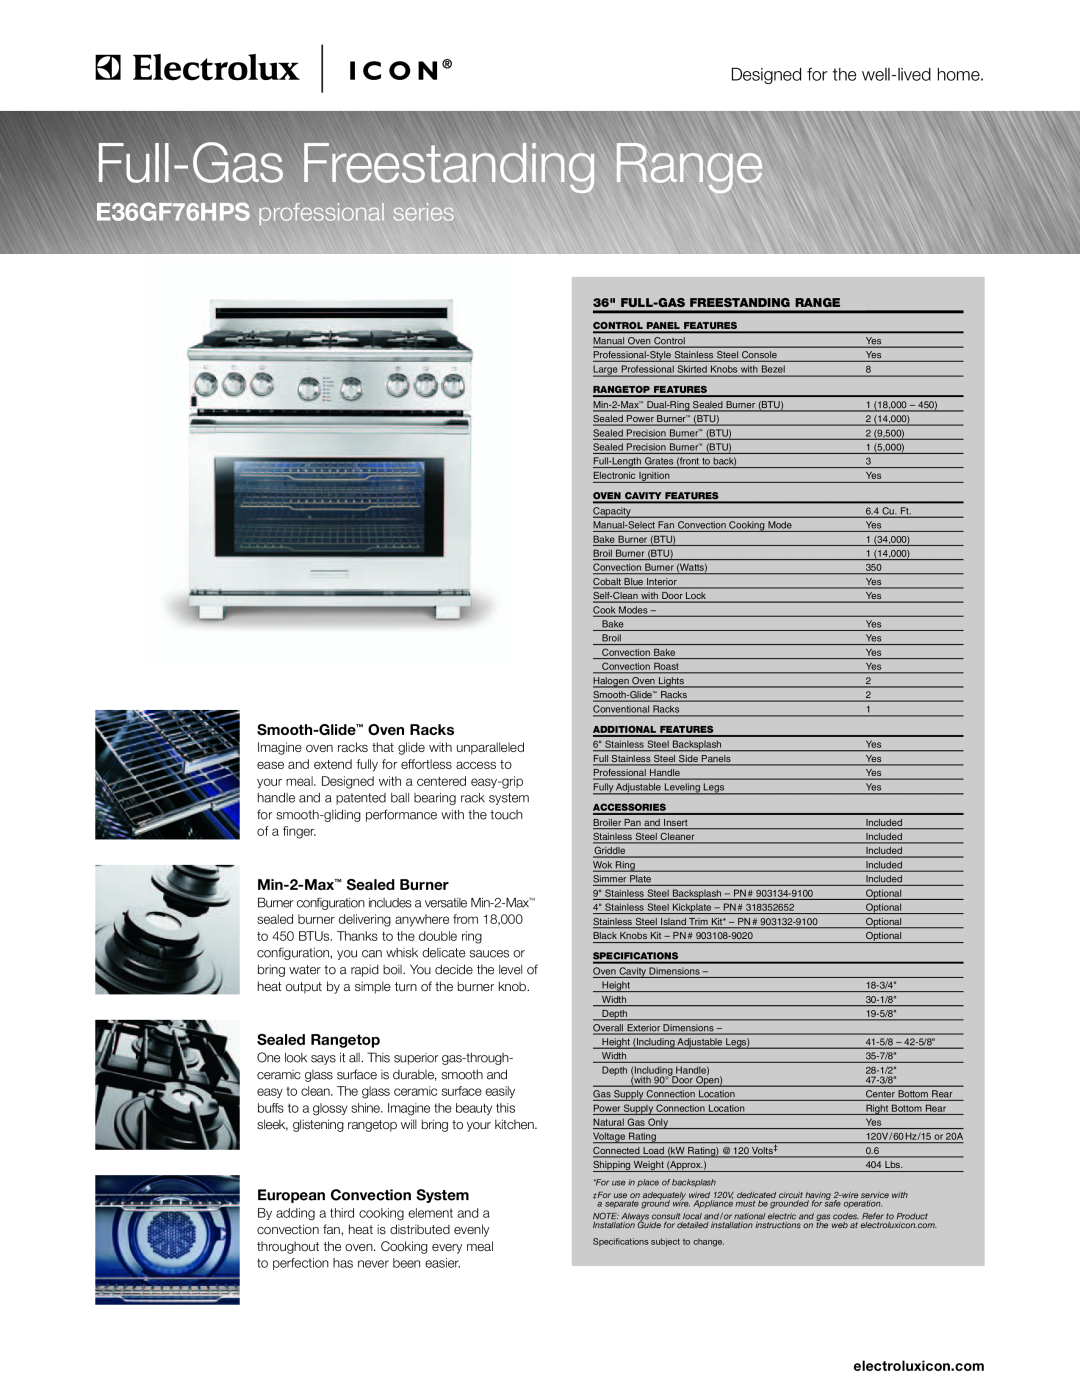 Electrolux E36GF76HPS specifications Smooth-Glide Oven Racks, Min-2-Max Sealed Burner, Sealed Rangetop, electroluxicon.com 